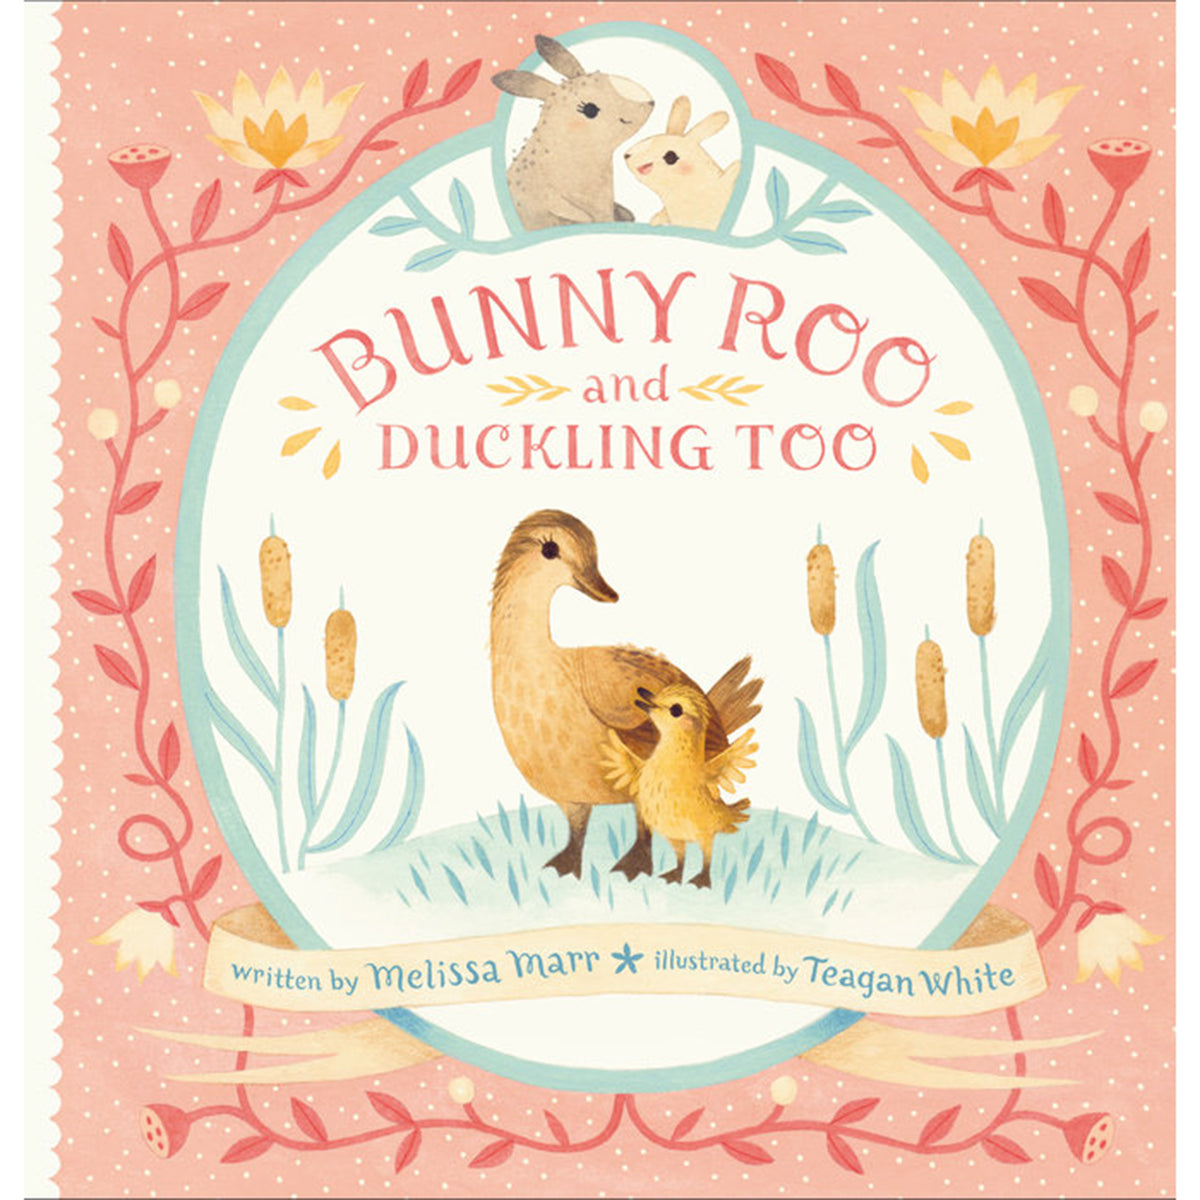 Bunny Roo and Duckling Too Children's Book